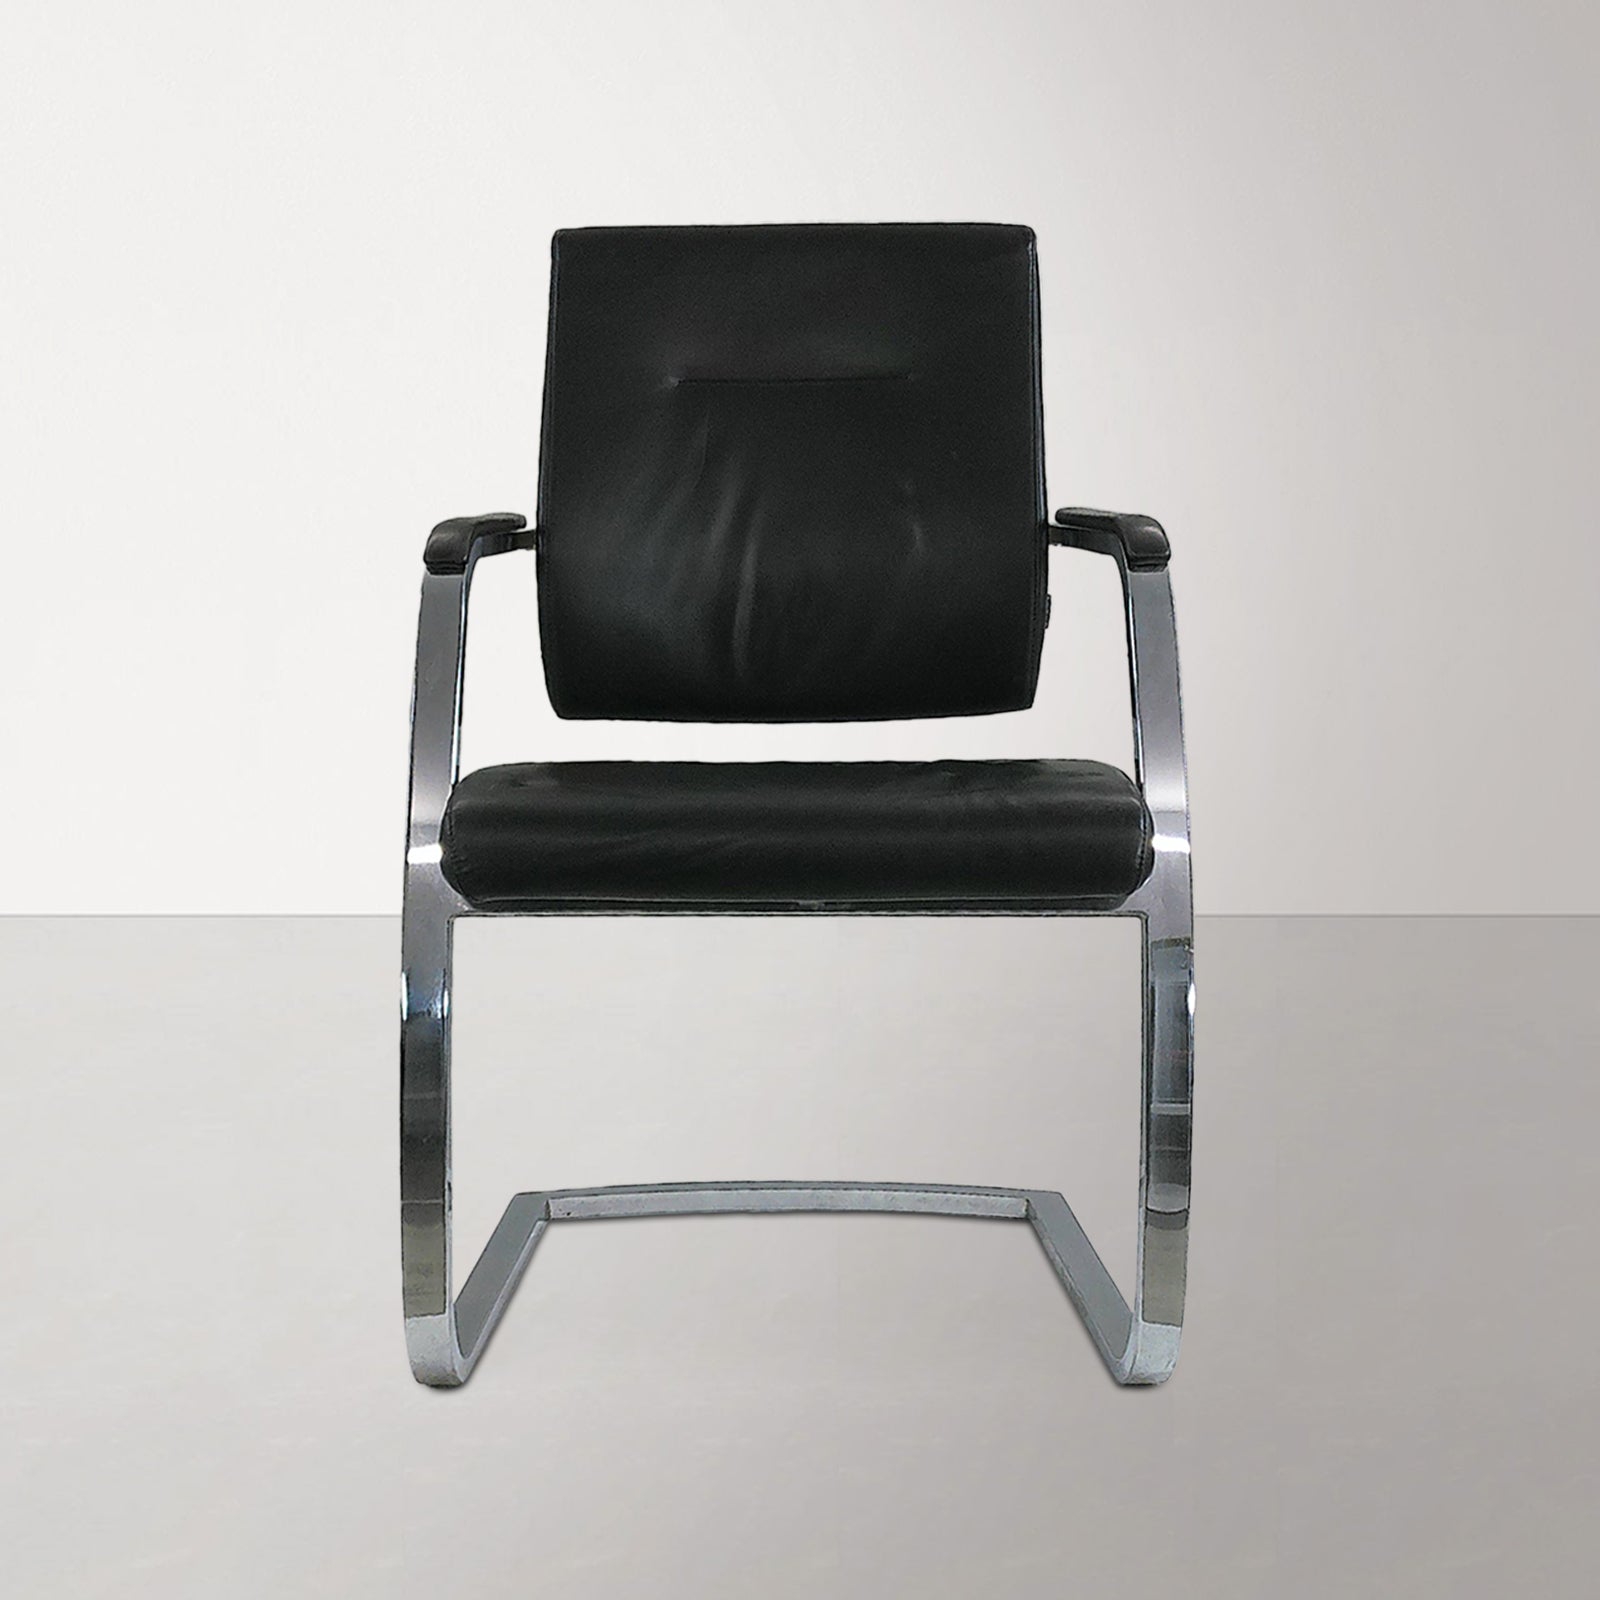 Verco: Vibe 2 Cantilever Lounge Chair - Refurbished